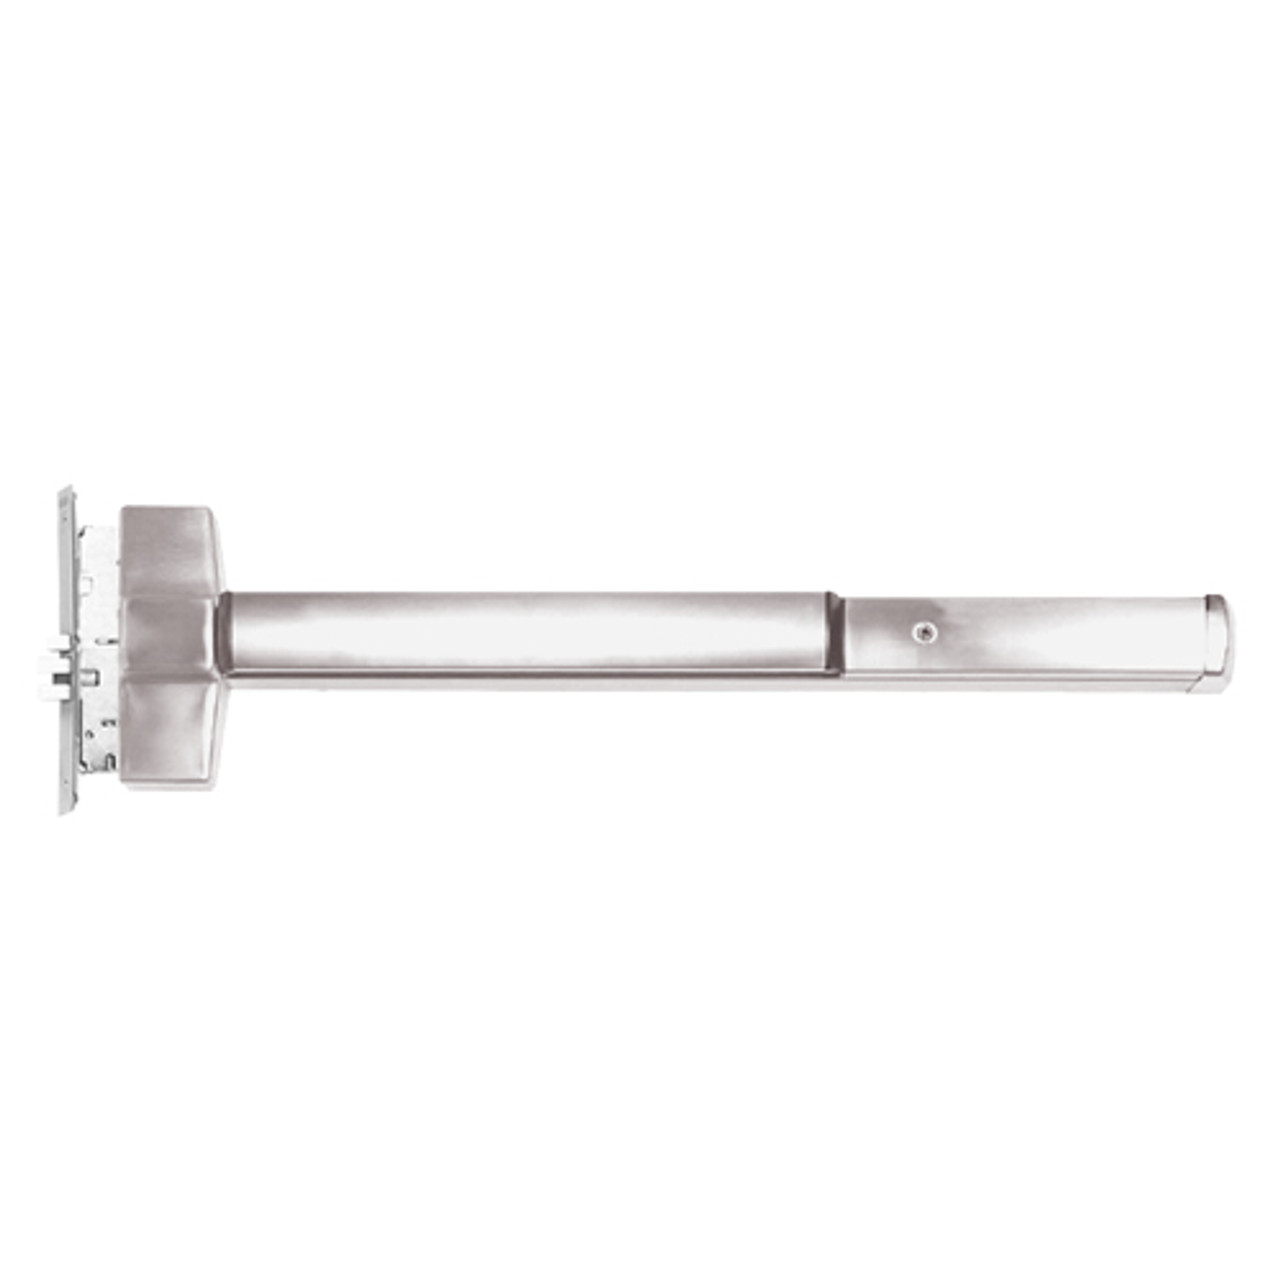 ED5600L-630-W048-LHR-SAF Corbin ED5600 Series Non Fire Rated Mortise Exit Device in Satin Stainless Steel Finish